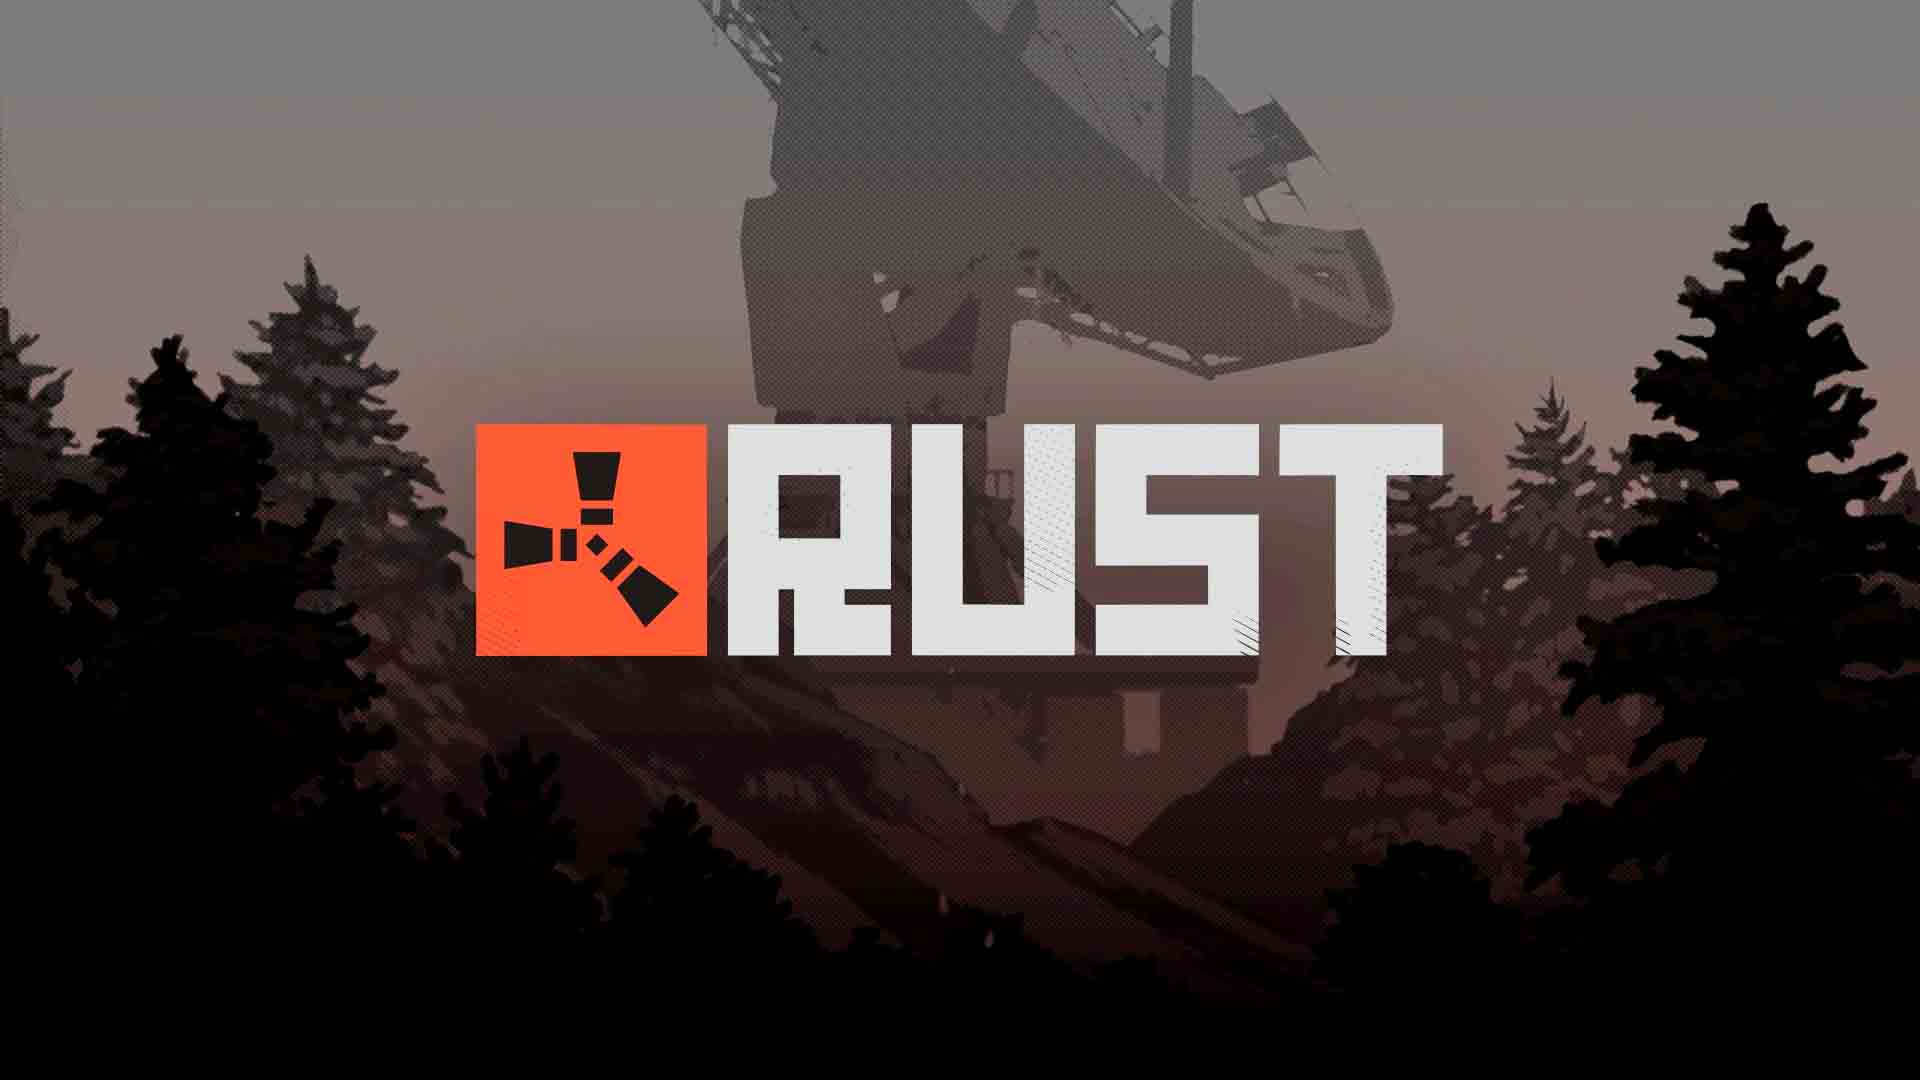 Rust PS5 Version Full Game Free Download